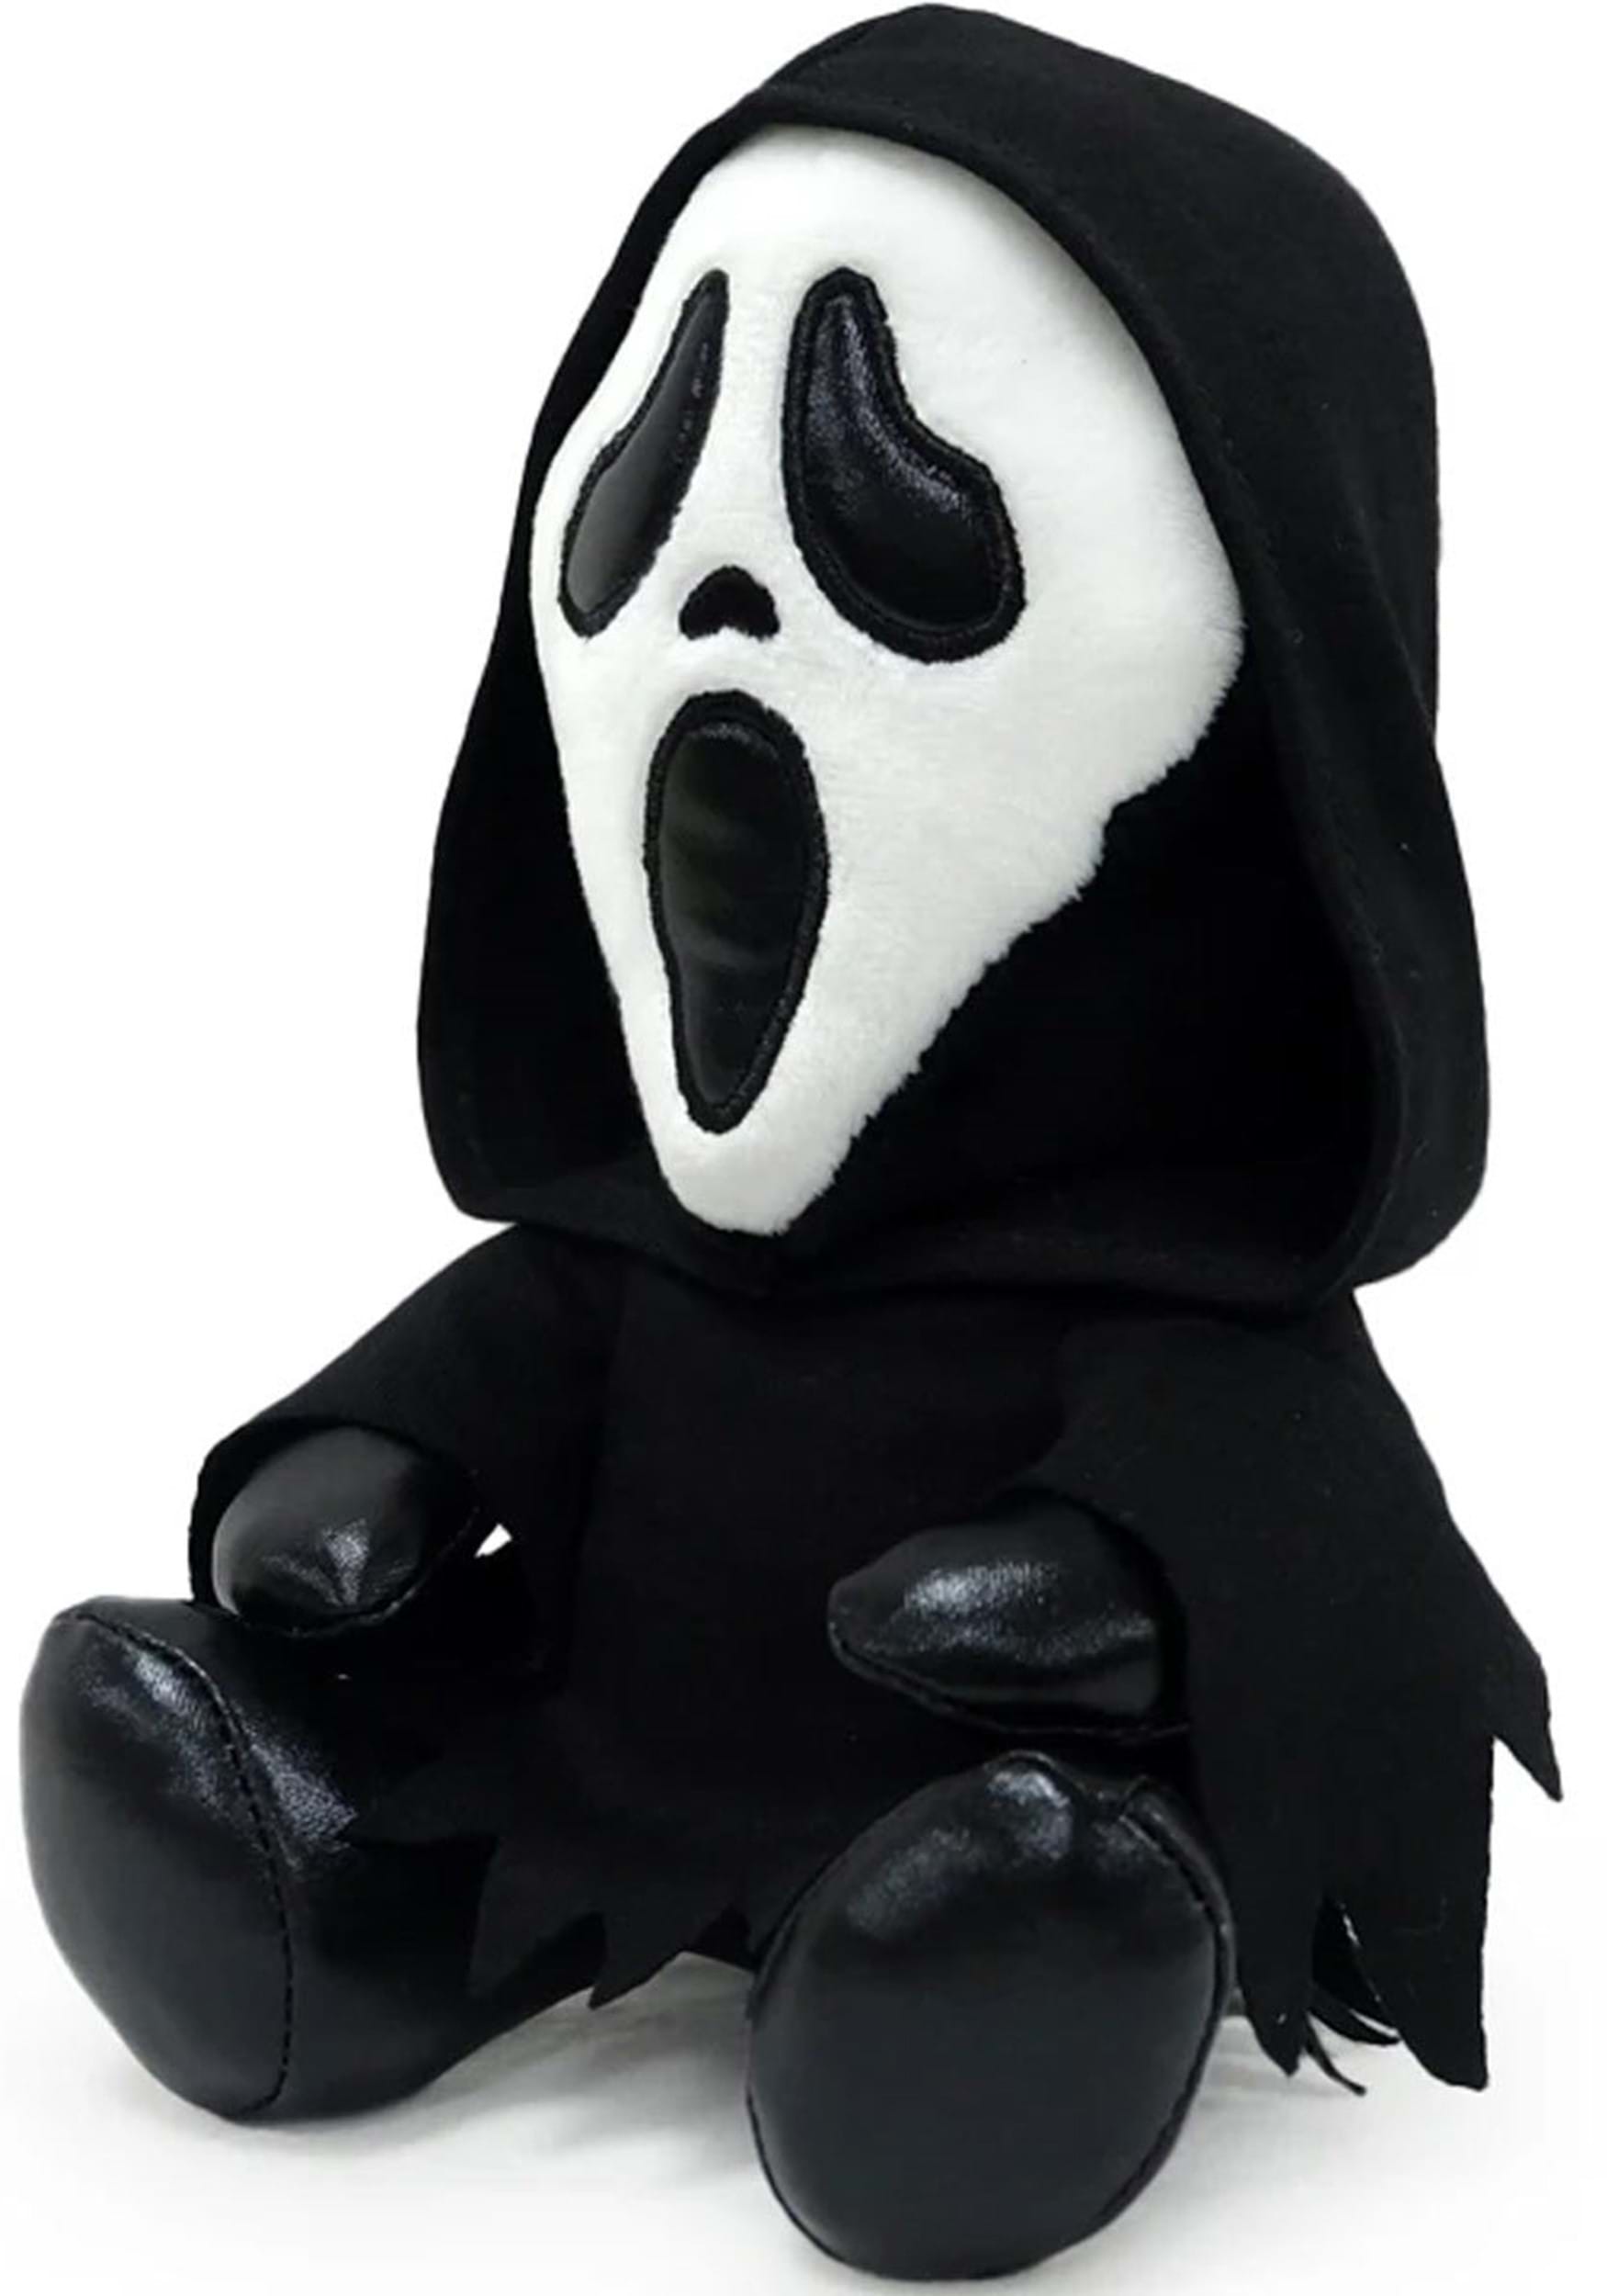 https://images.fun.com/products/78712/2-1-201762/ghost-face-8-phunny-plush-alt-3.jpg